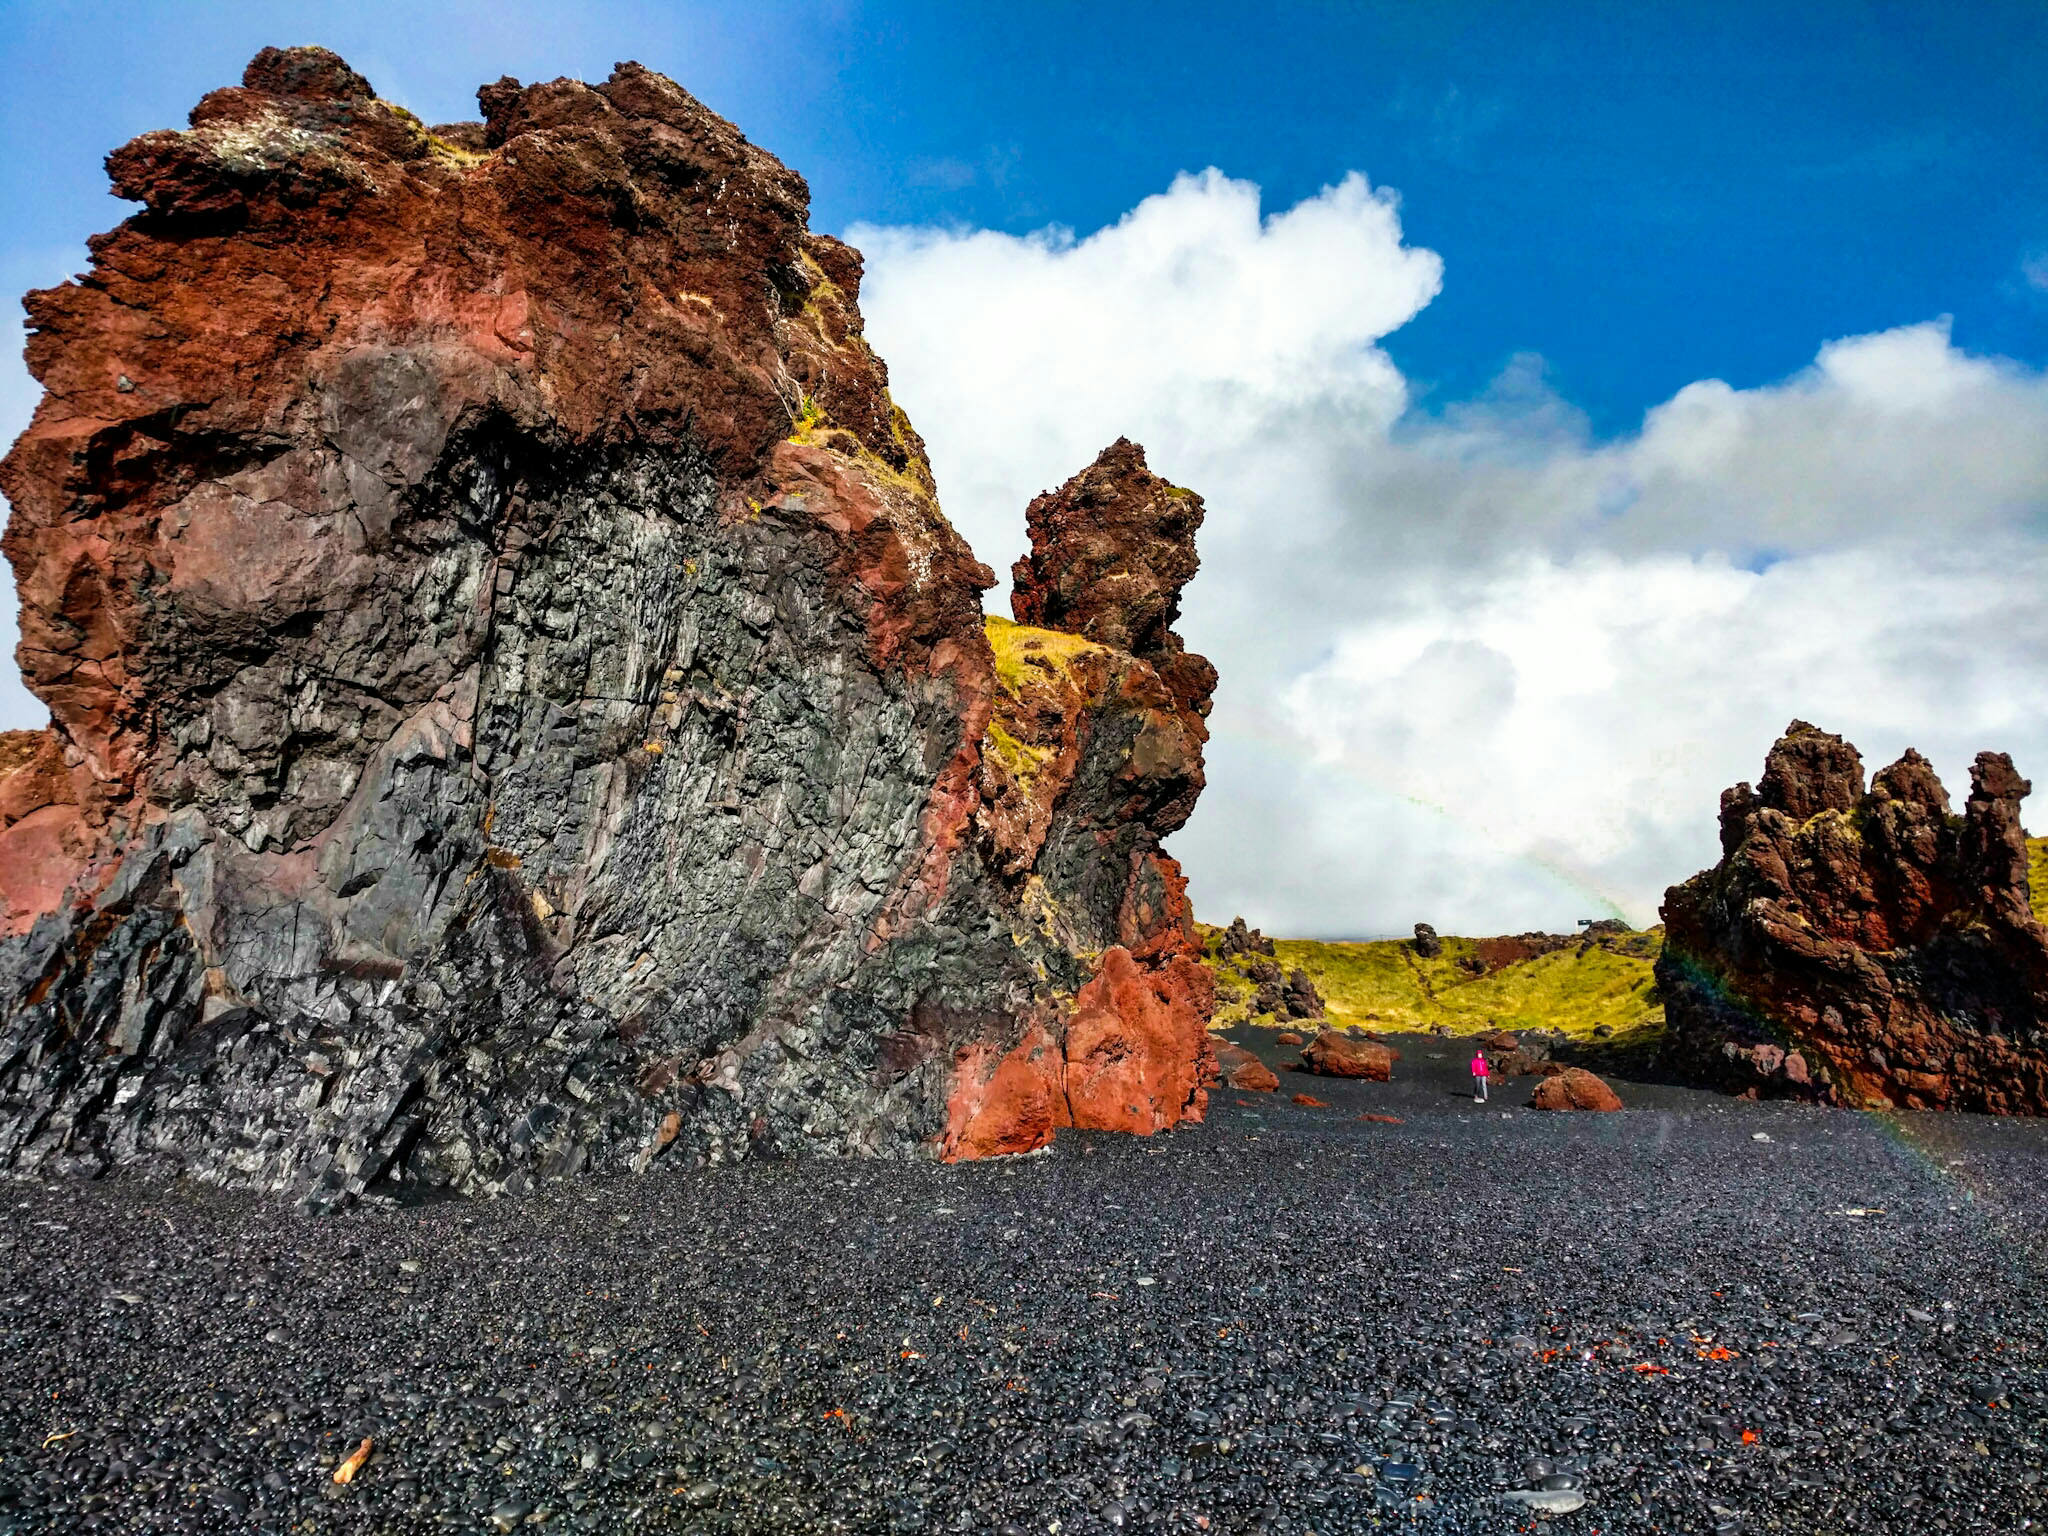 Black Beaches Iceland with red rock formations - Photos of Iceland